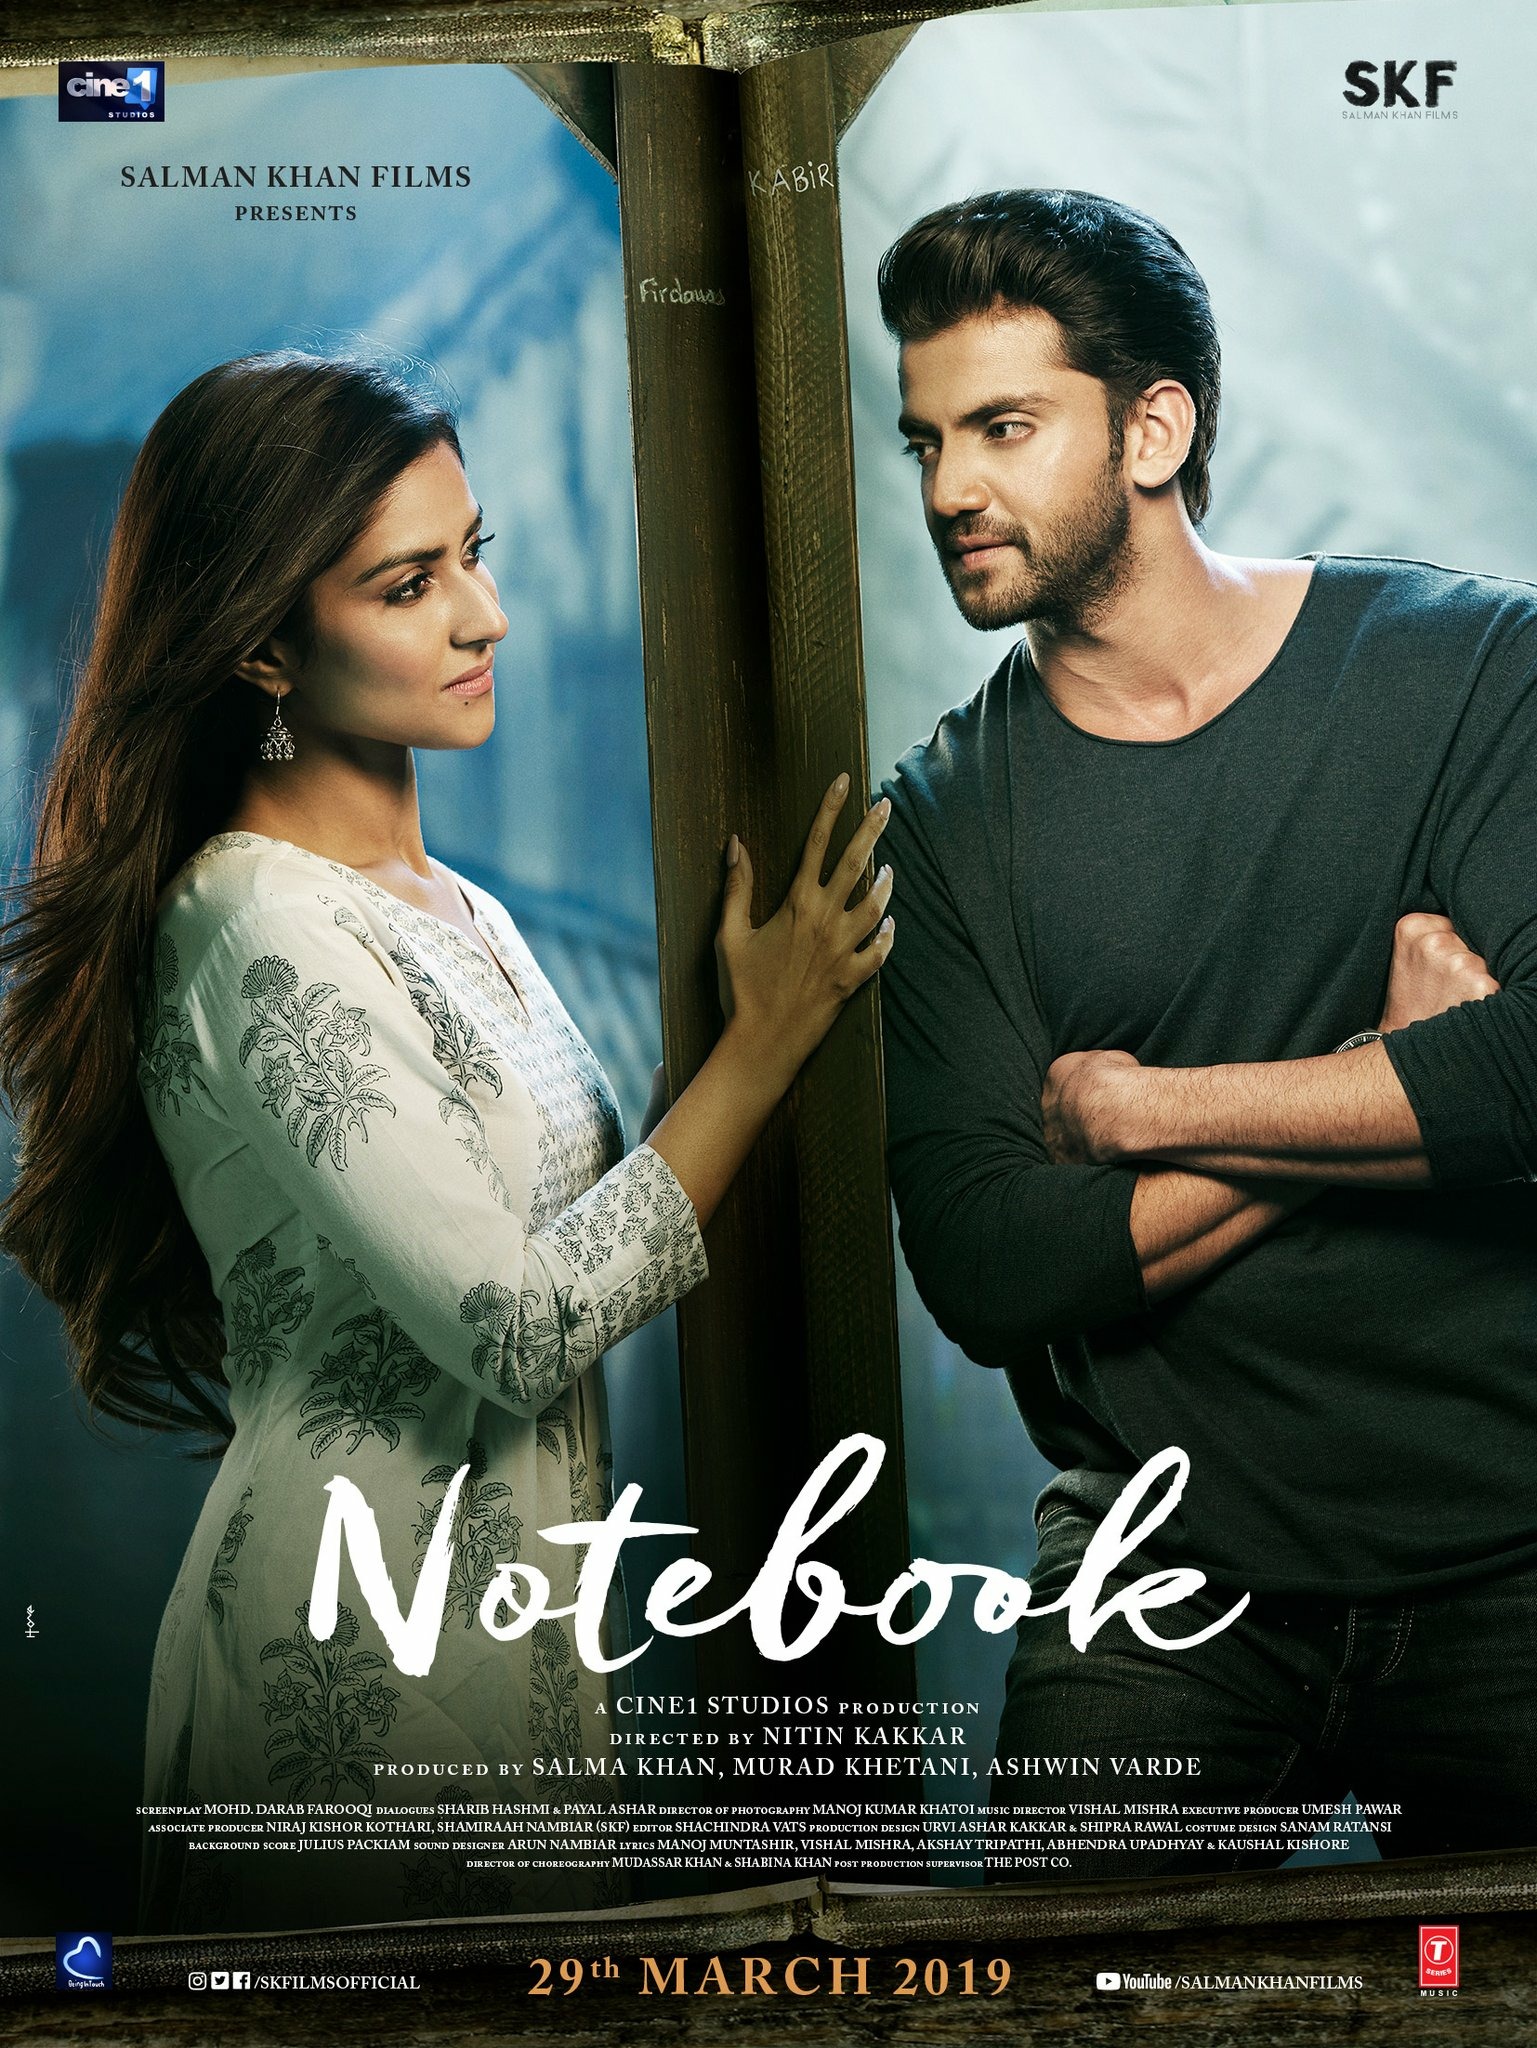 Mega Sized Movie Poster Image for Notebook (#1 of 2)